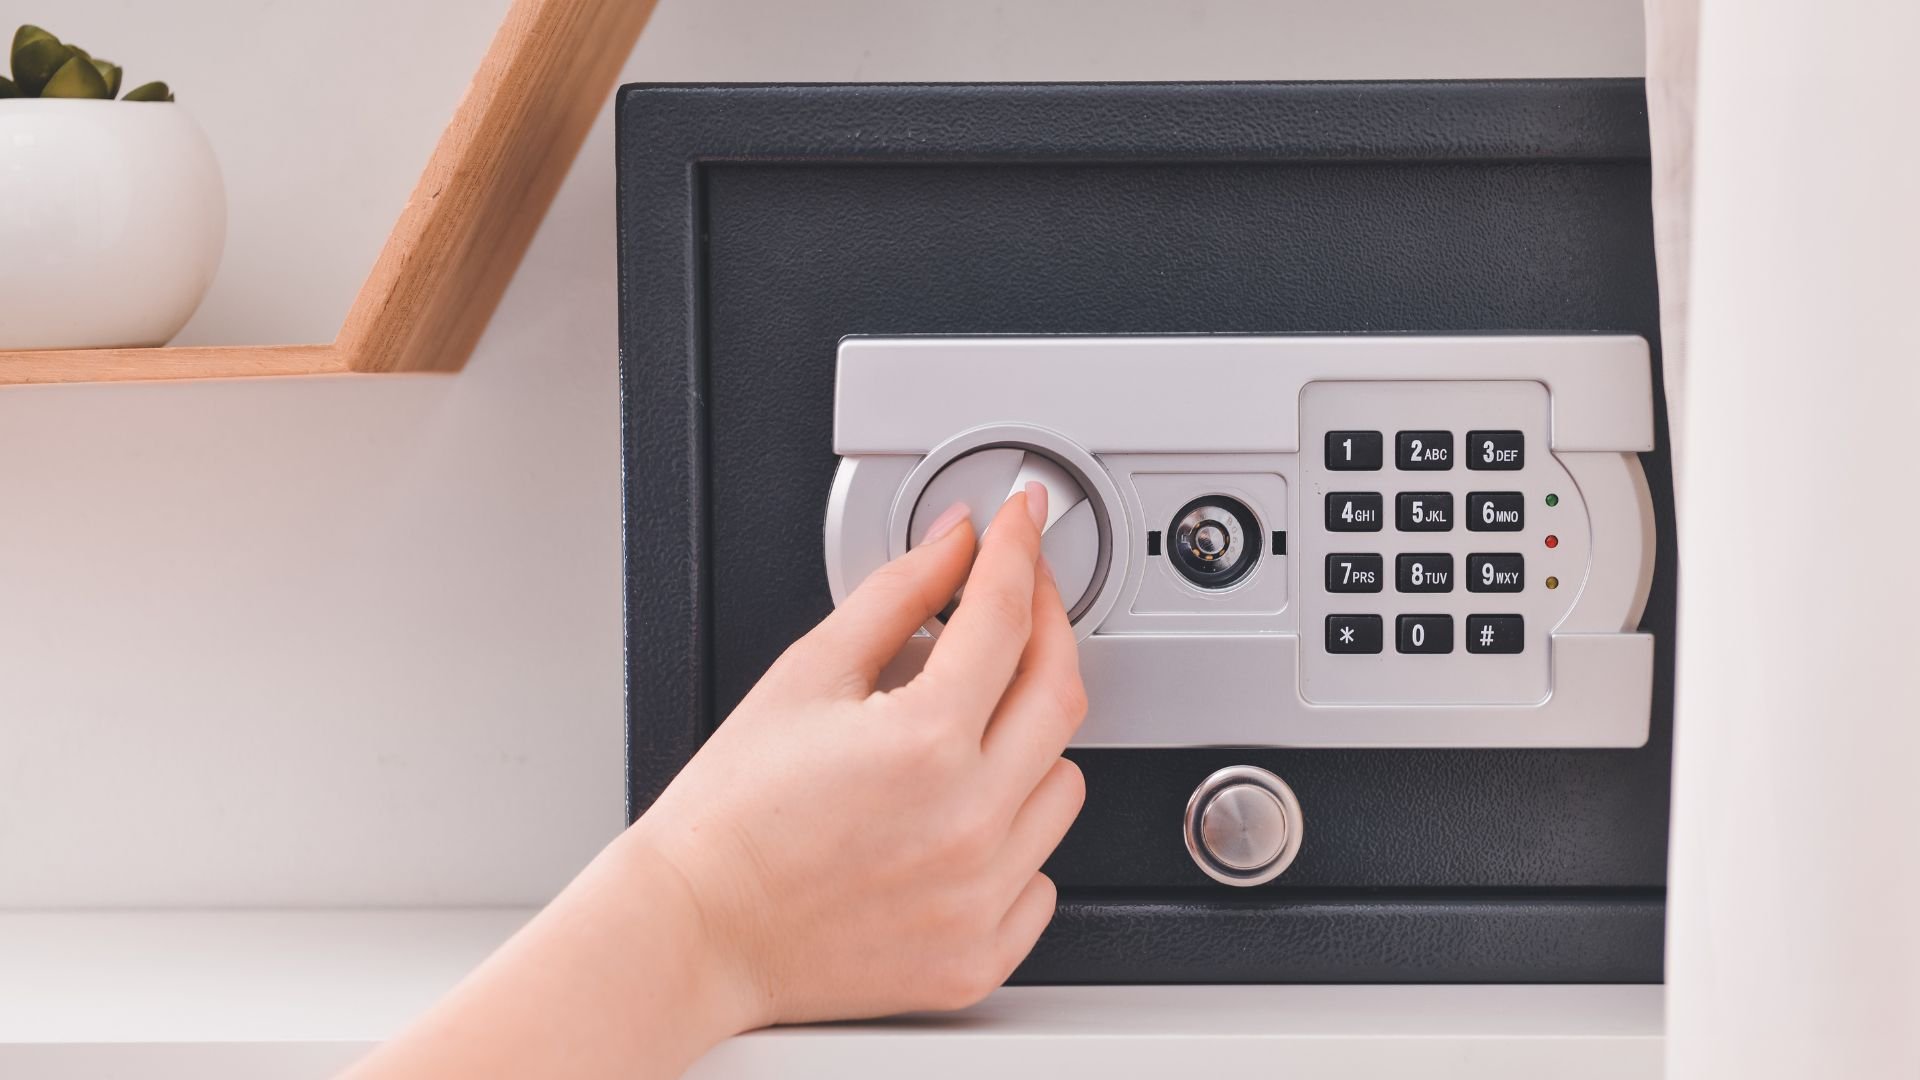 Keep Your Valuables Protected With This DIY Hidden Wall Safe